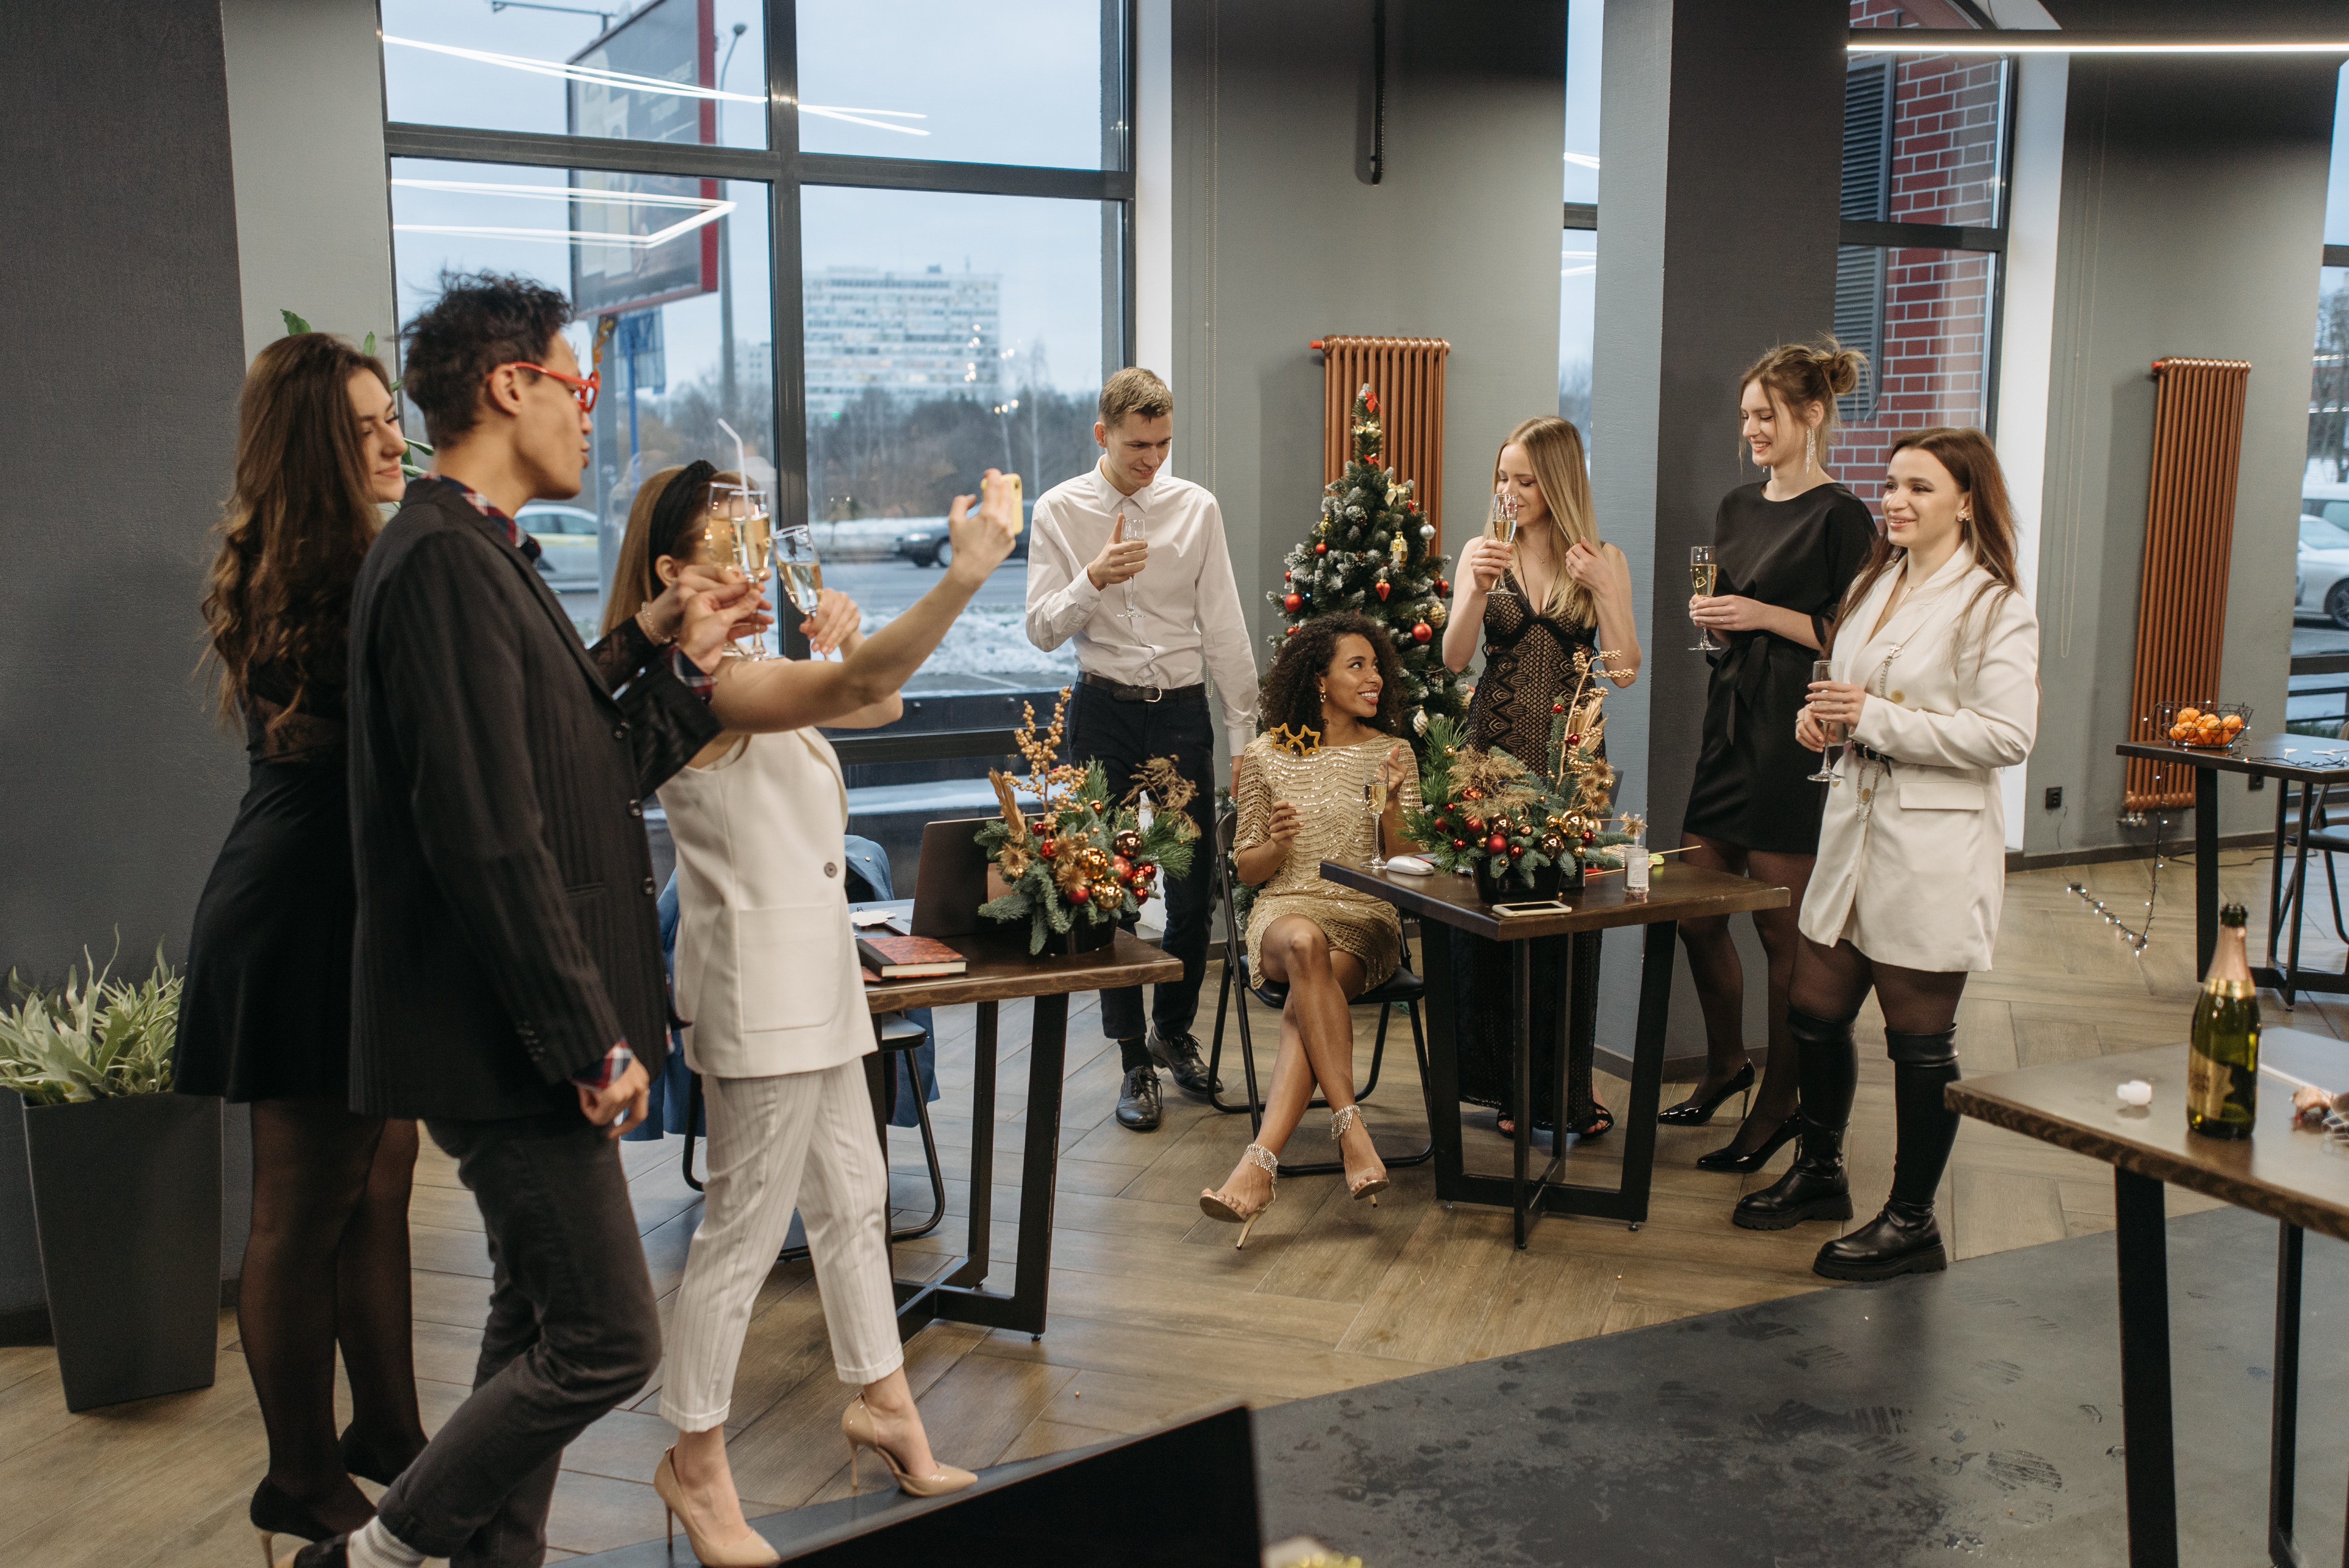 Legal Considerations for Company Holiday Parties